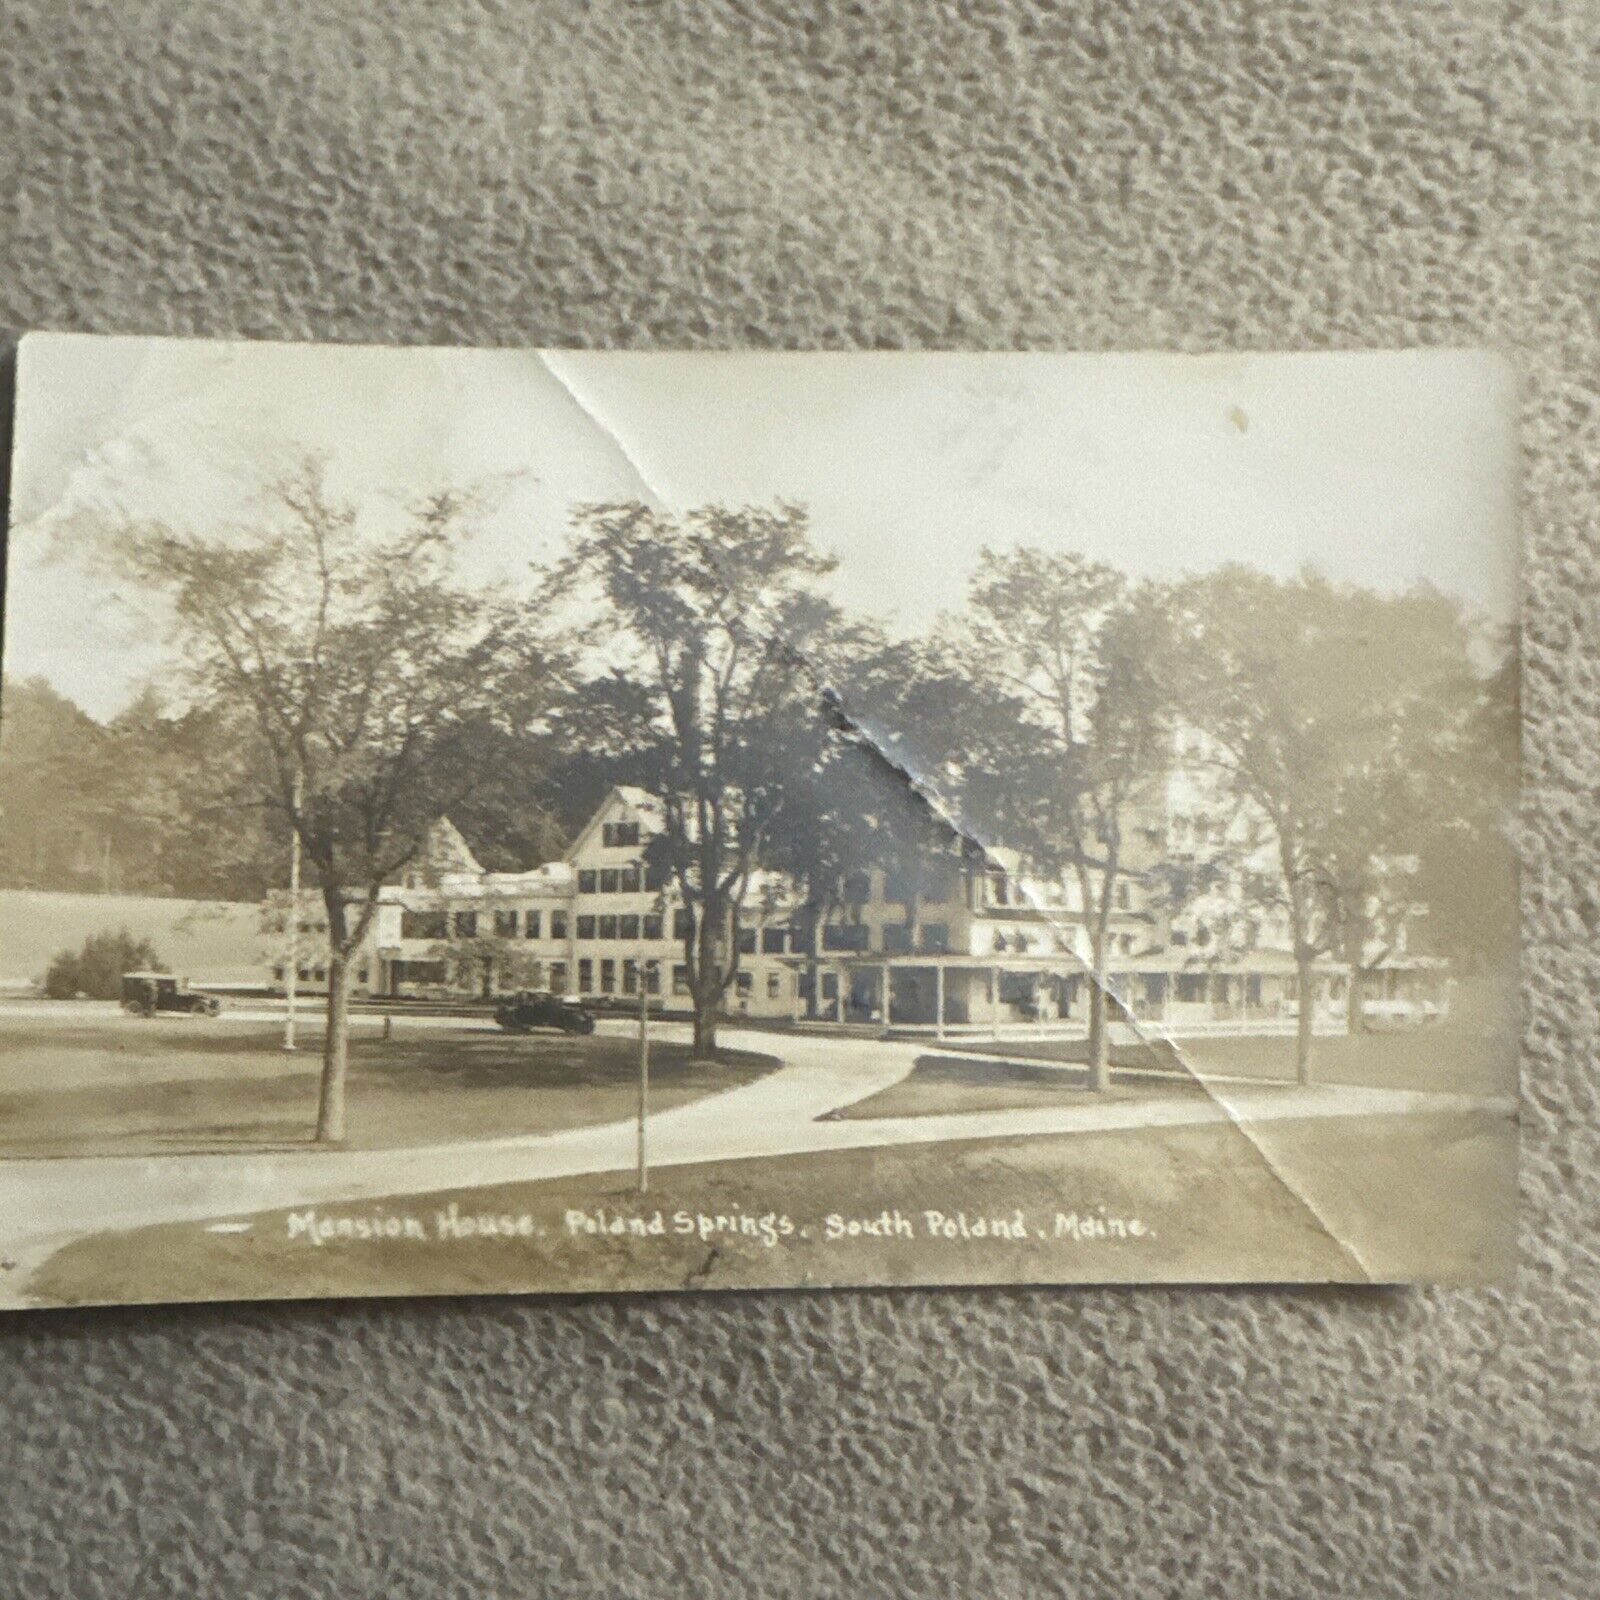 Mansion House Poland Springs, South Poland, Maine Vintage RPPC Unposted